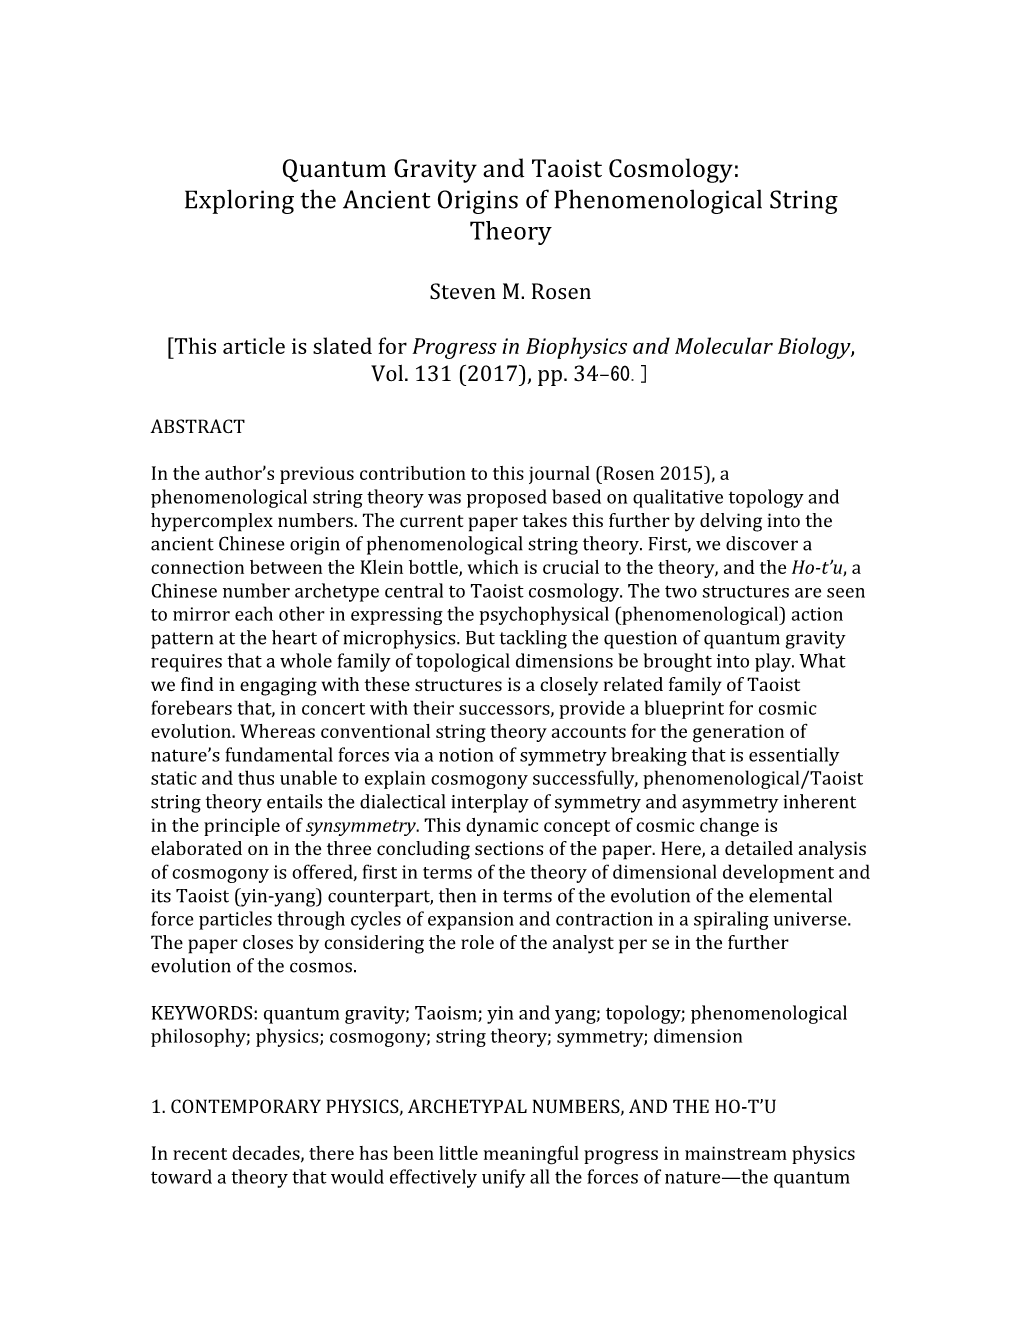 Quantum Gravity and Taoist Cosmology: Exploring the Ancient Origins of Phenomenological String Theory